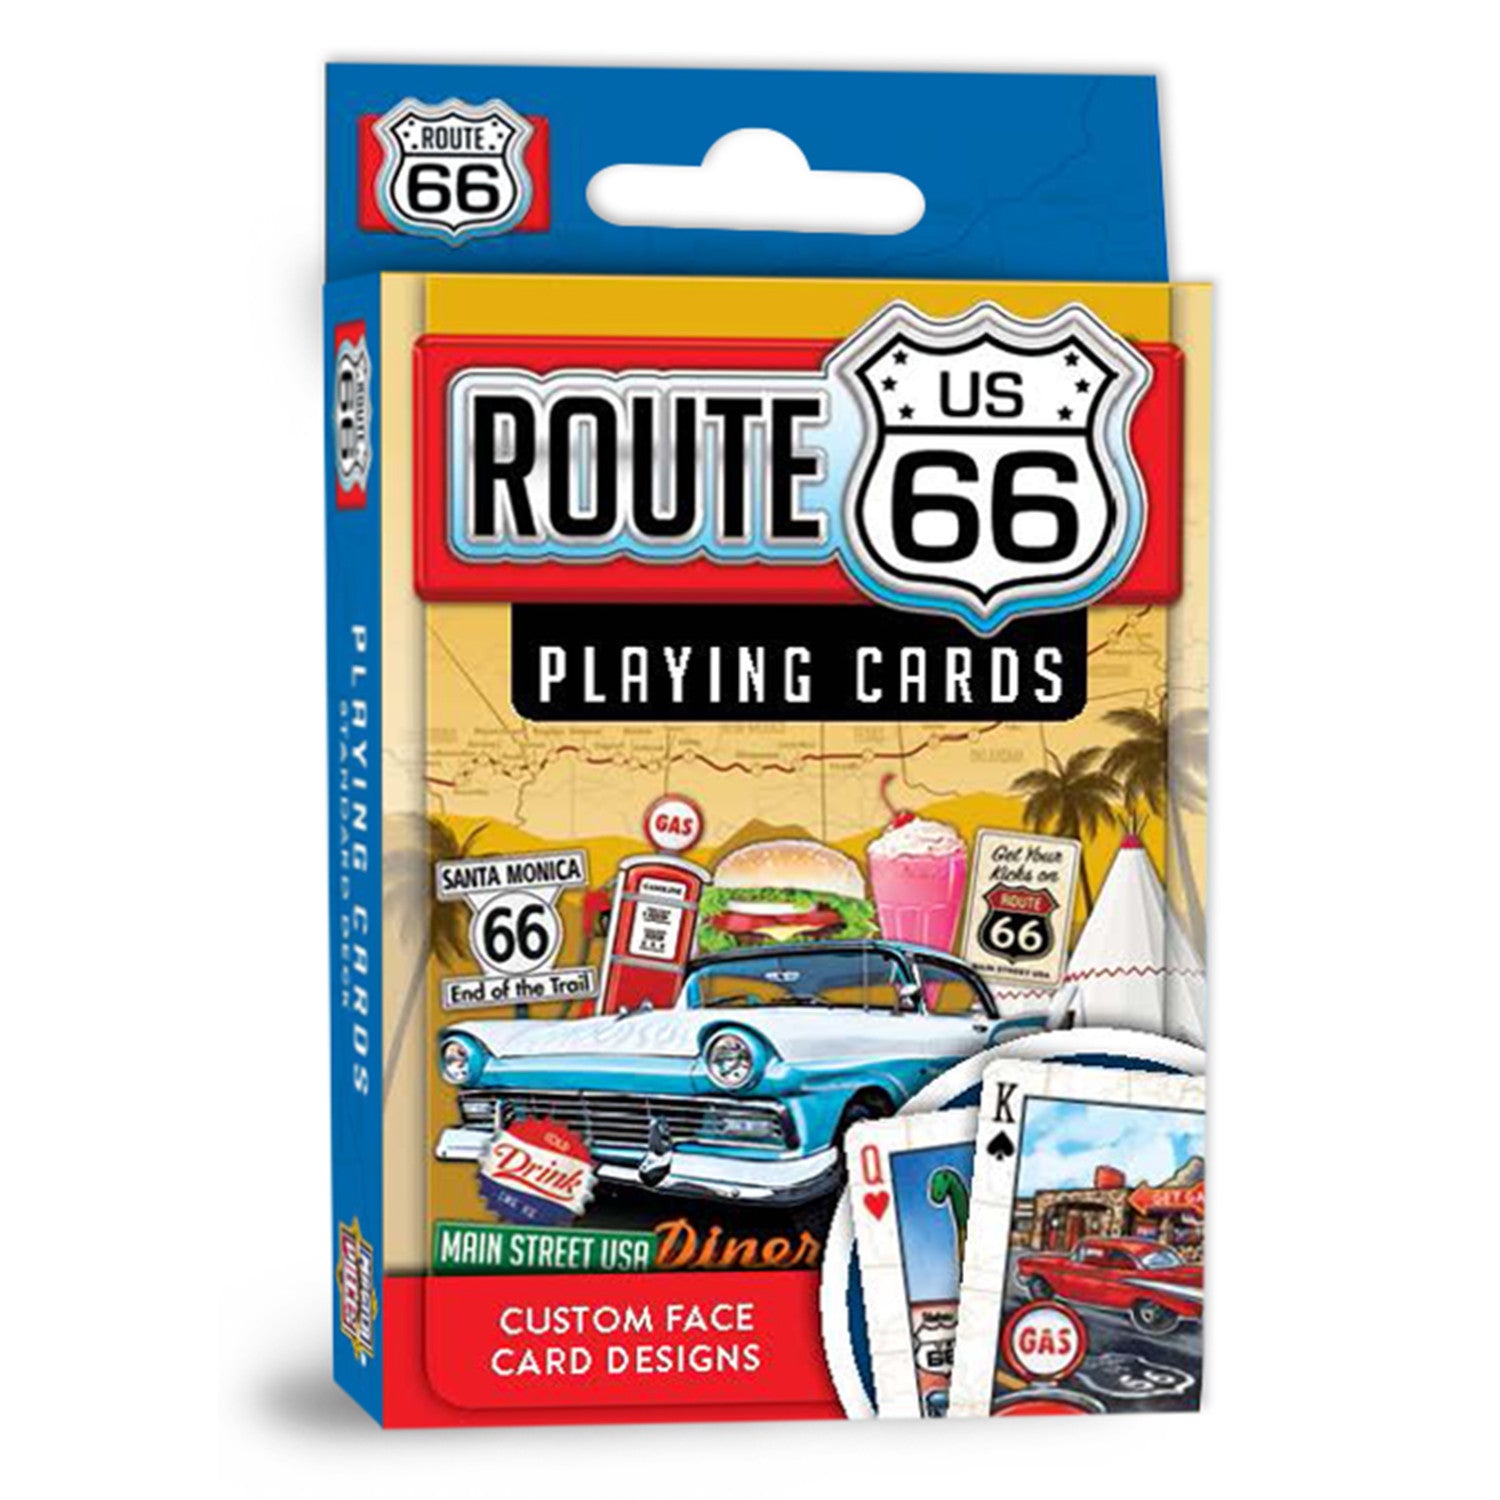 Route 66 Playing Cards - 54 Card Deck